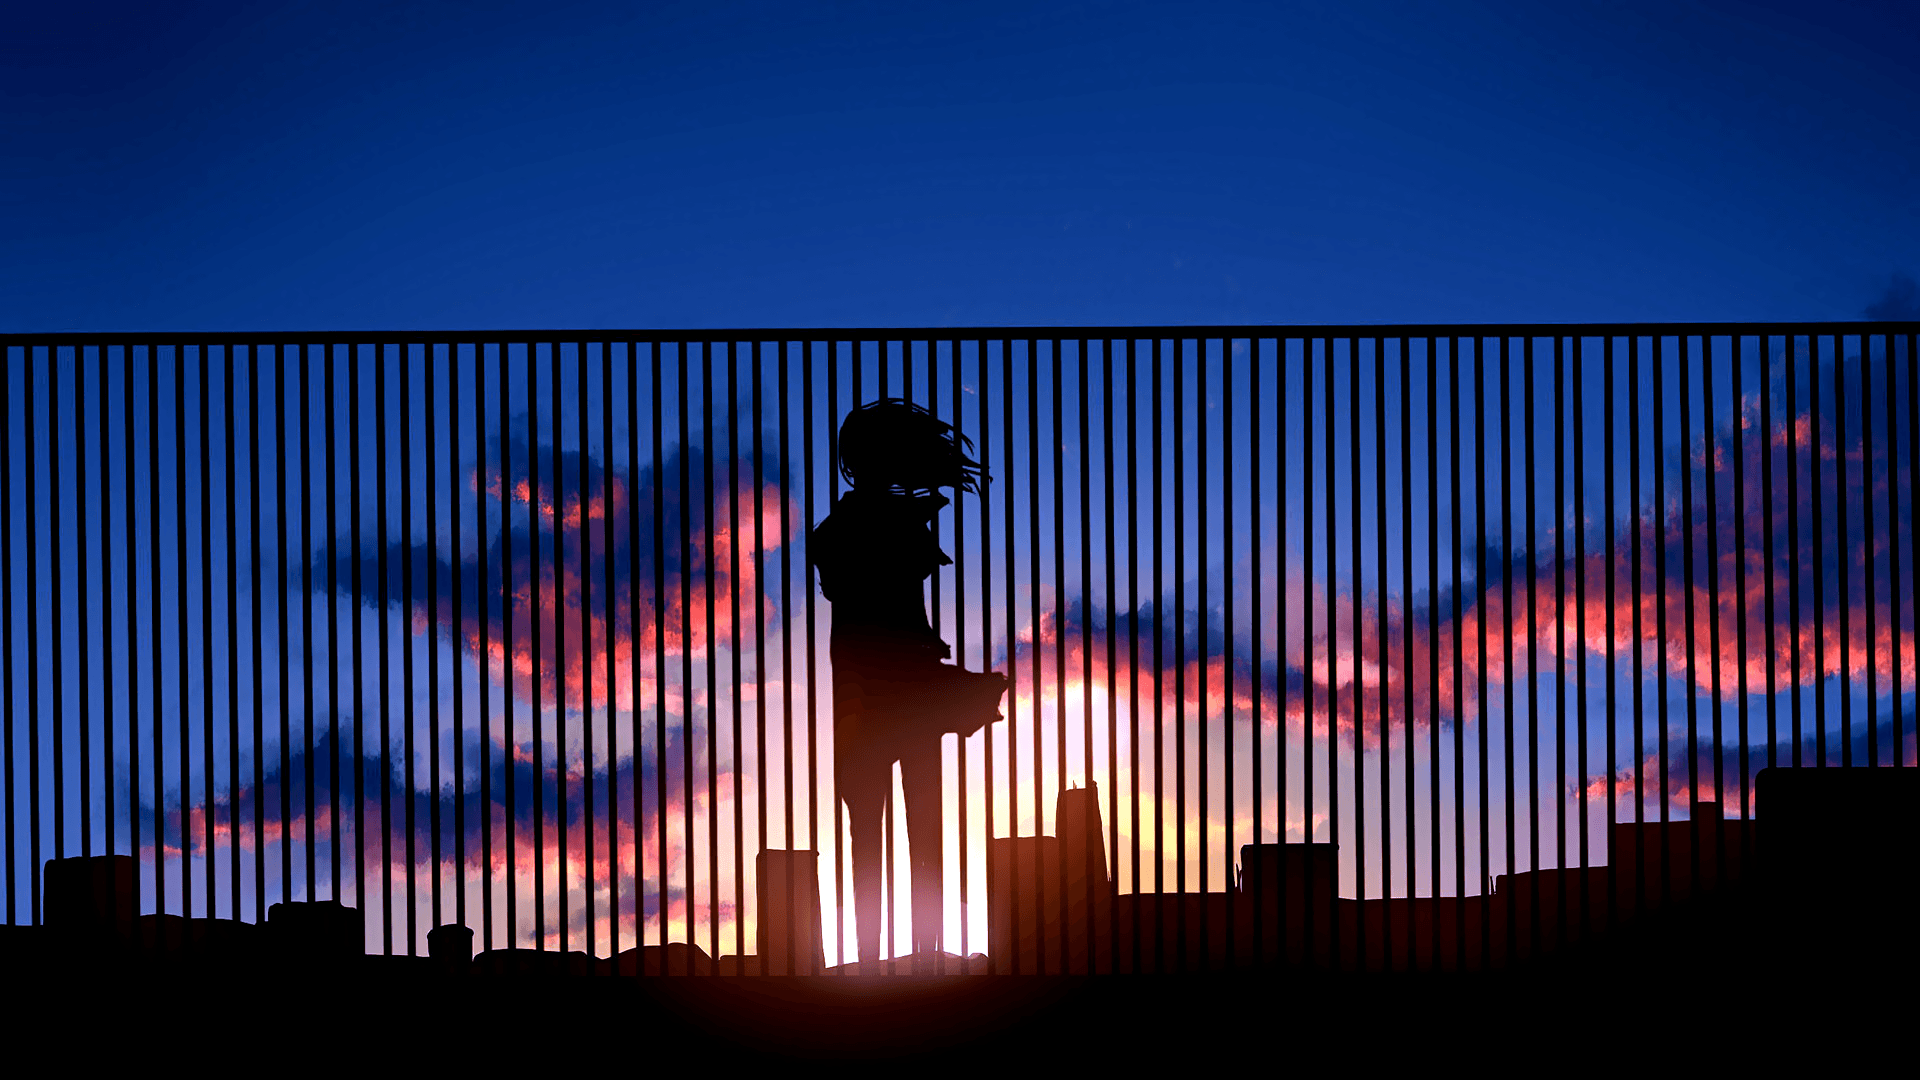 10+ Anime Aesthetic HD Wallpapers and Backgrounds